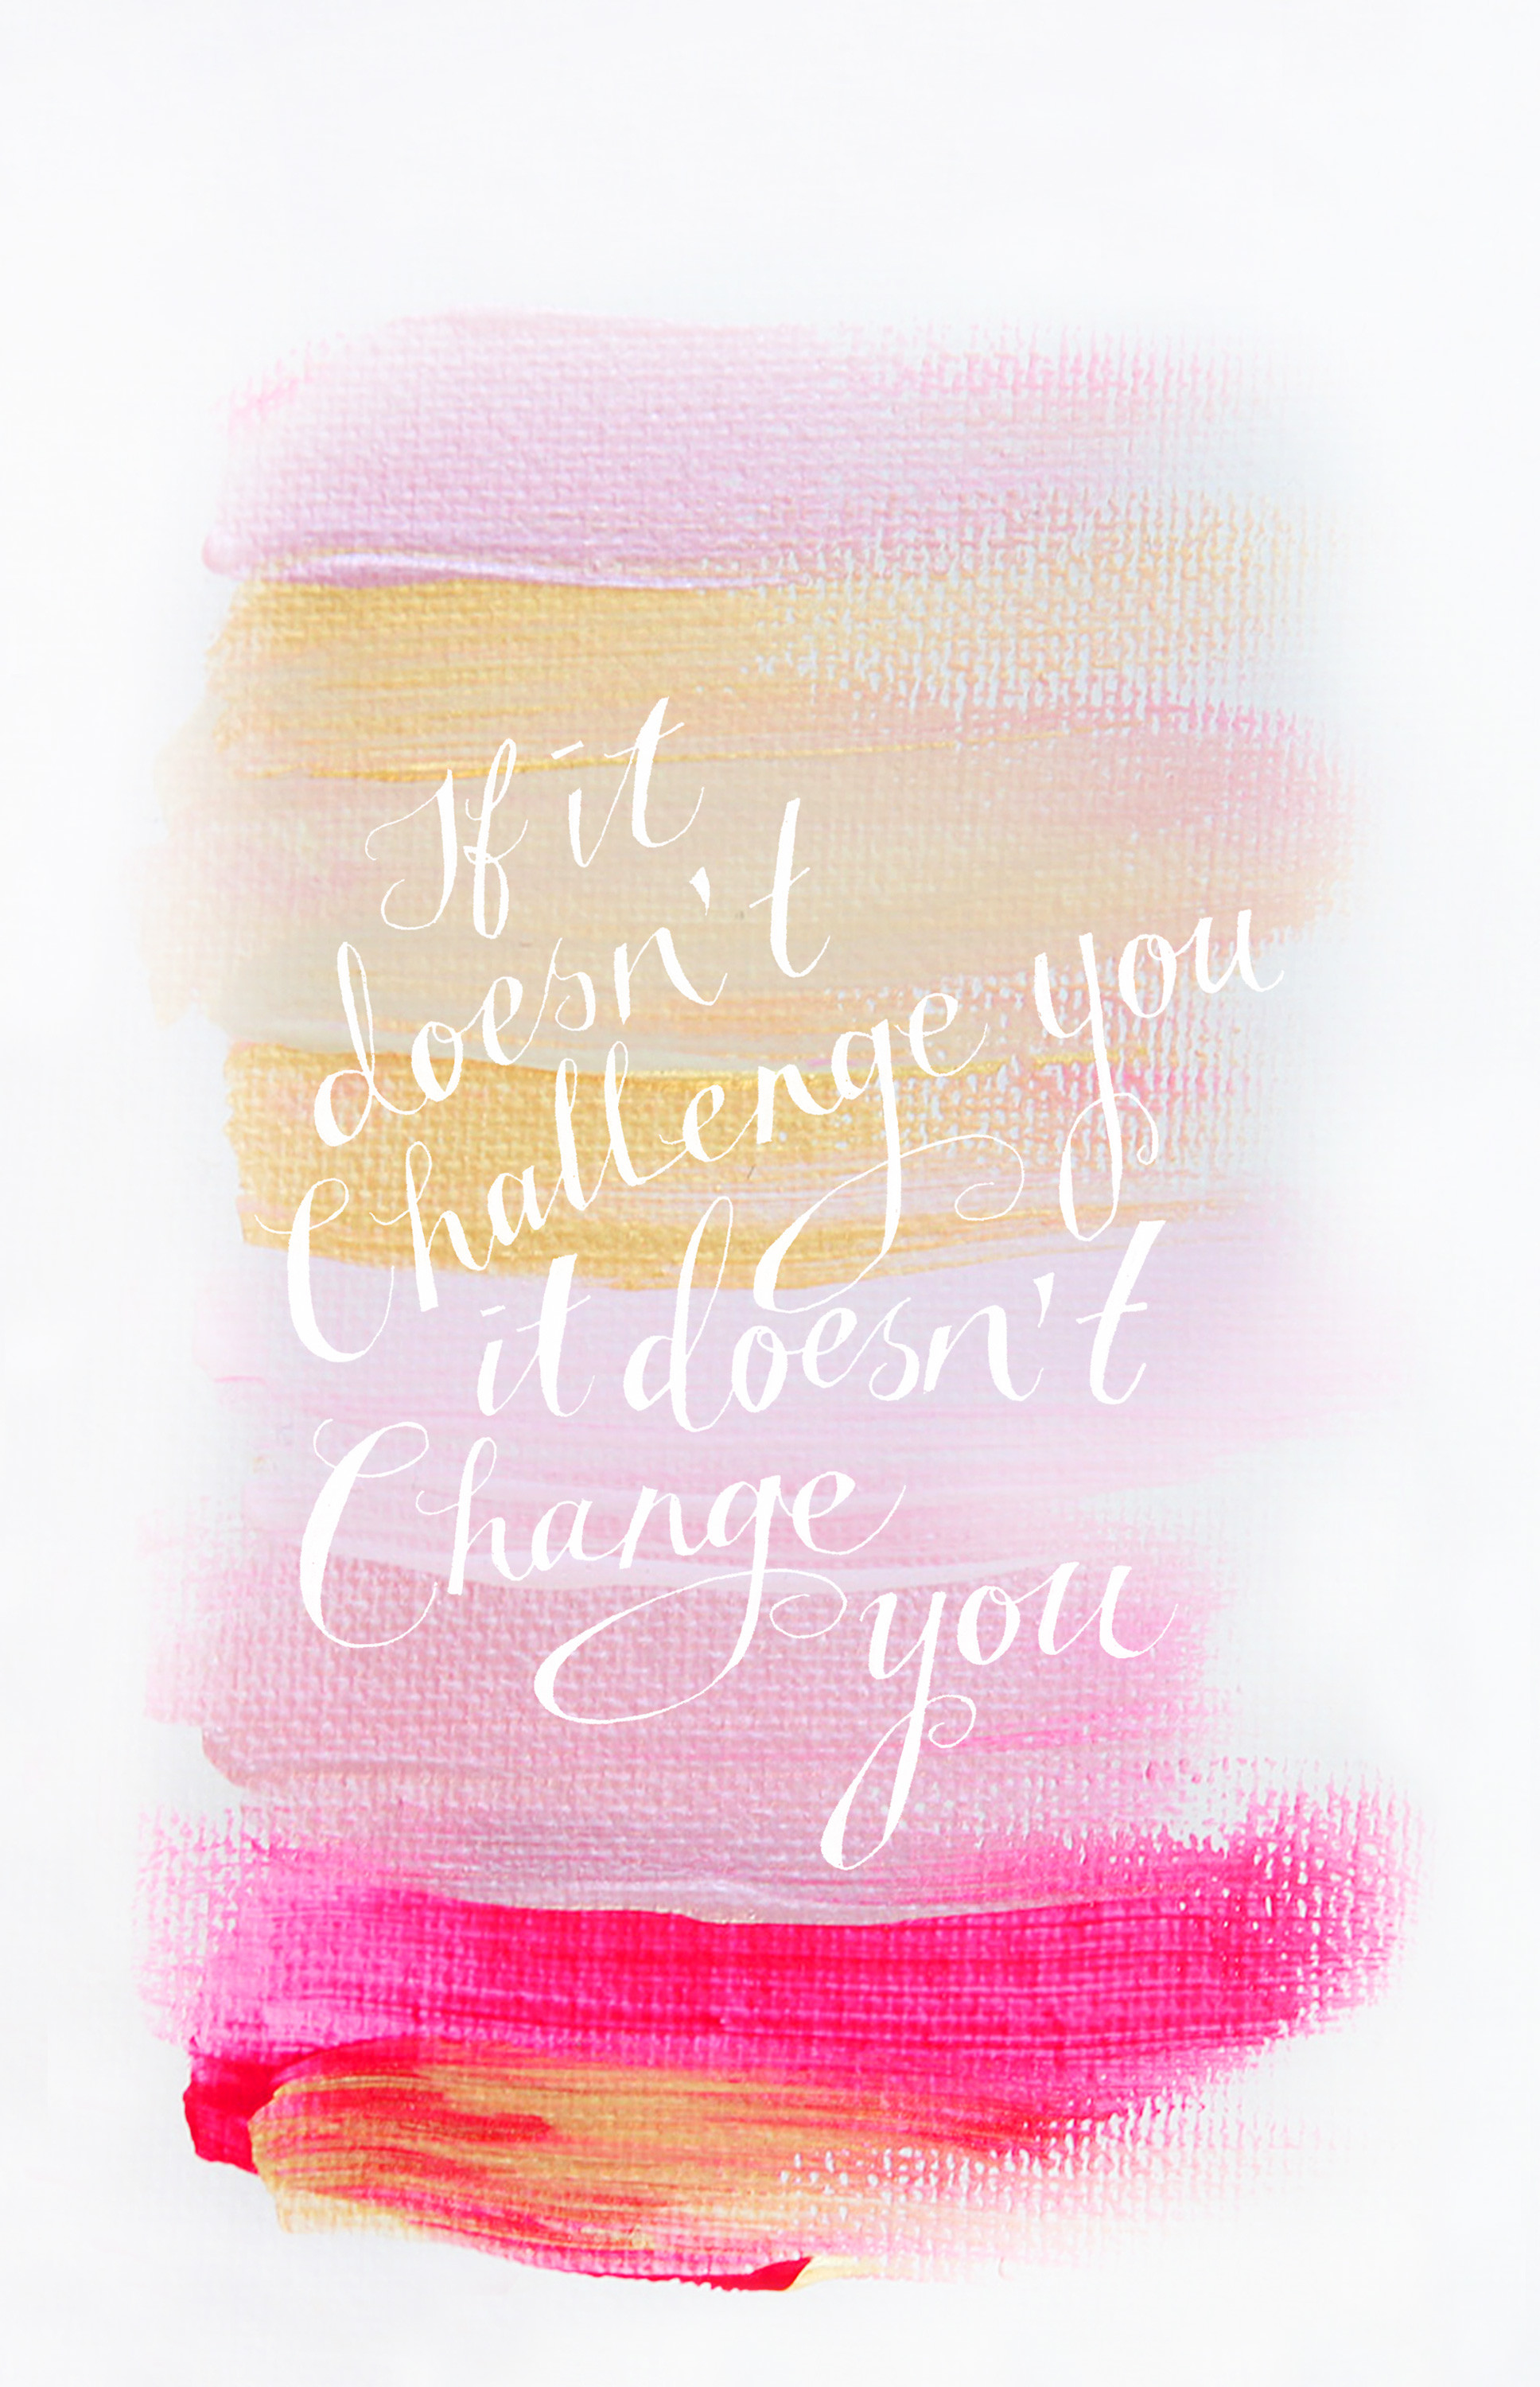 1936x3000 Free Wallpaper: If it doesn't challenge you it doesn't change you